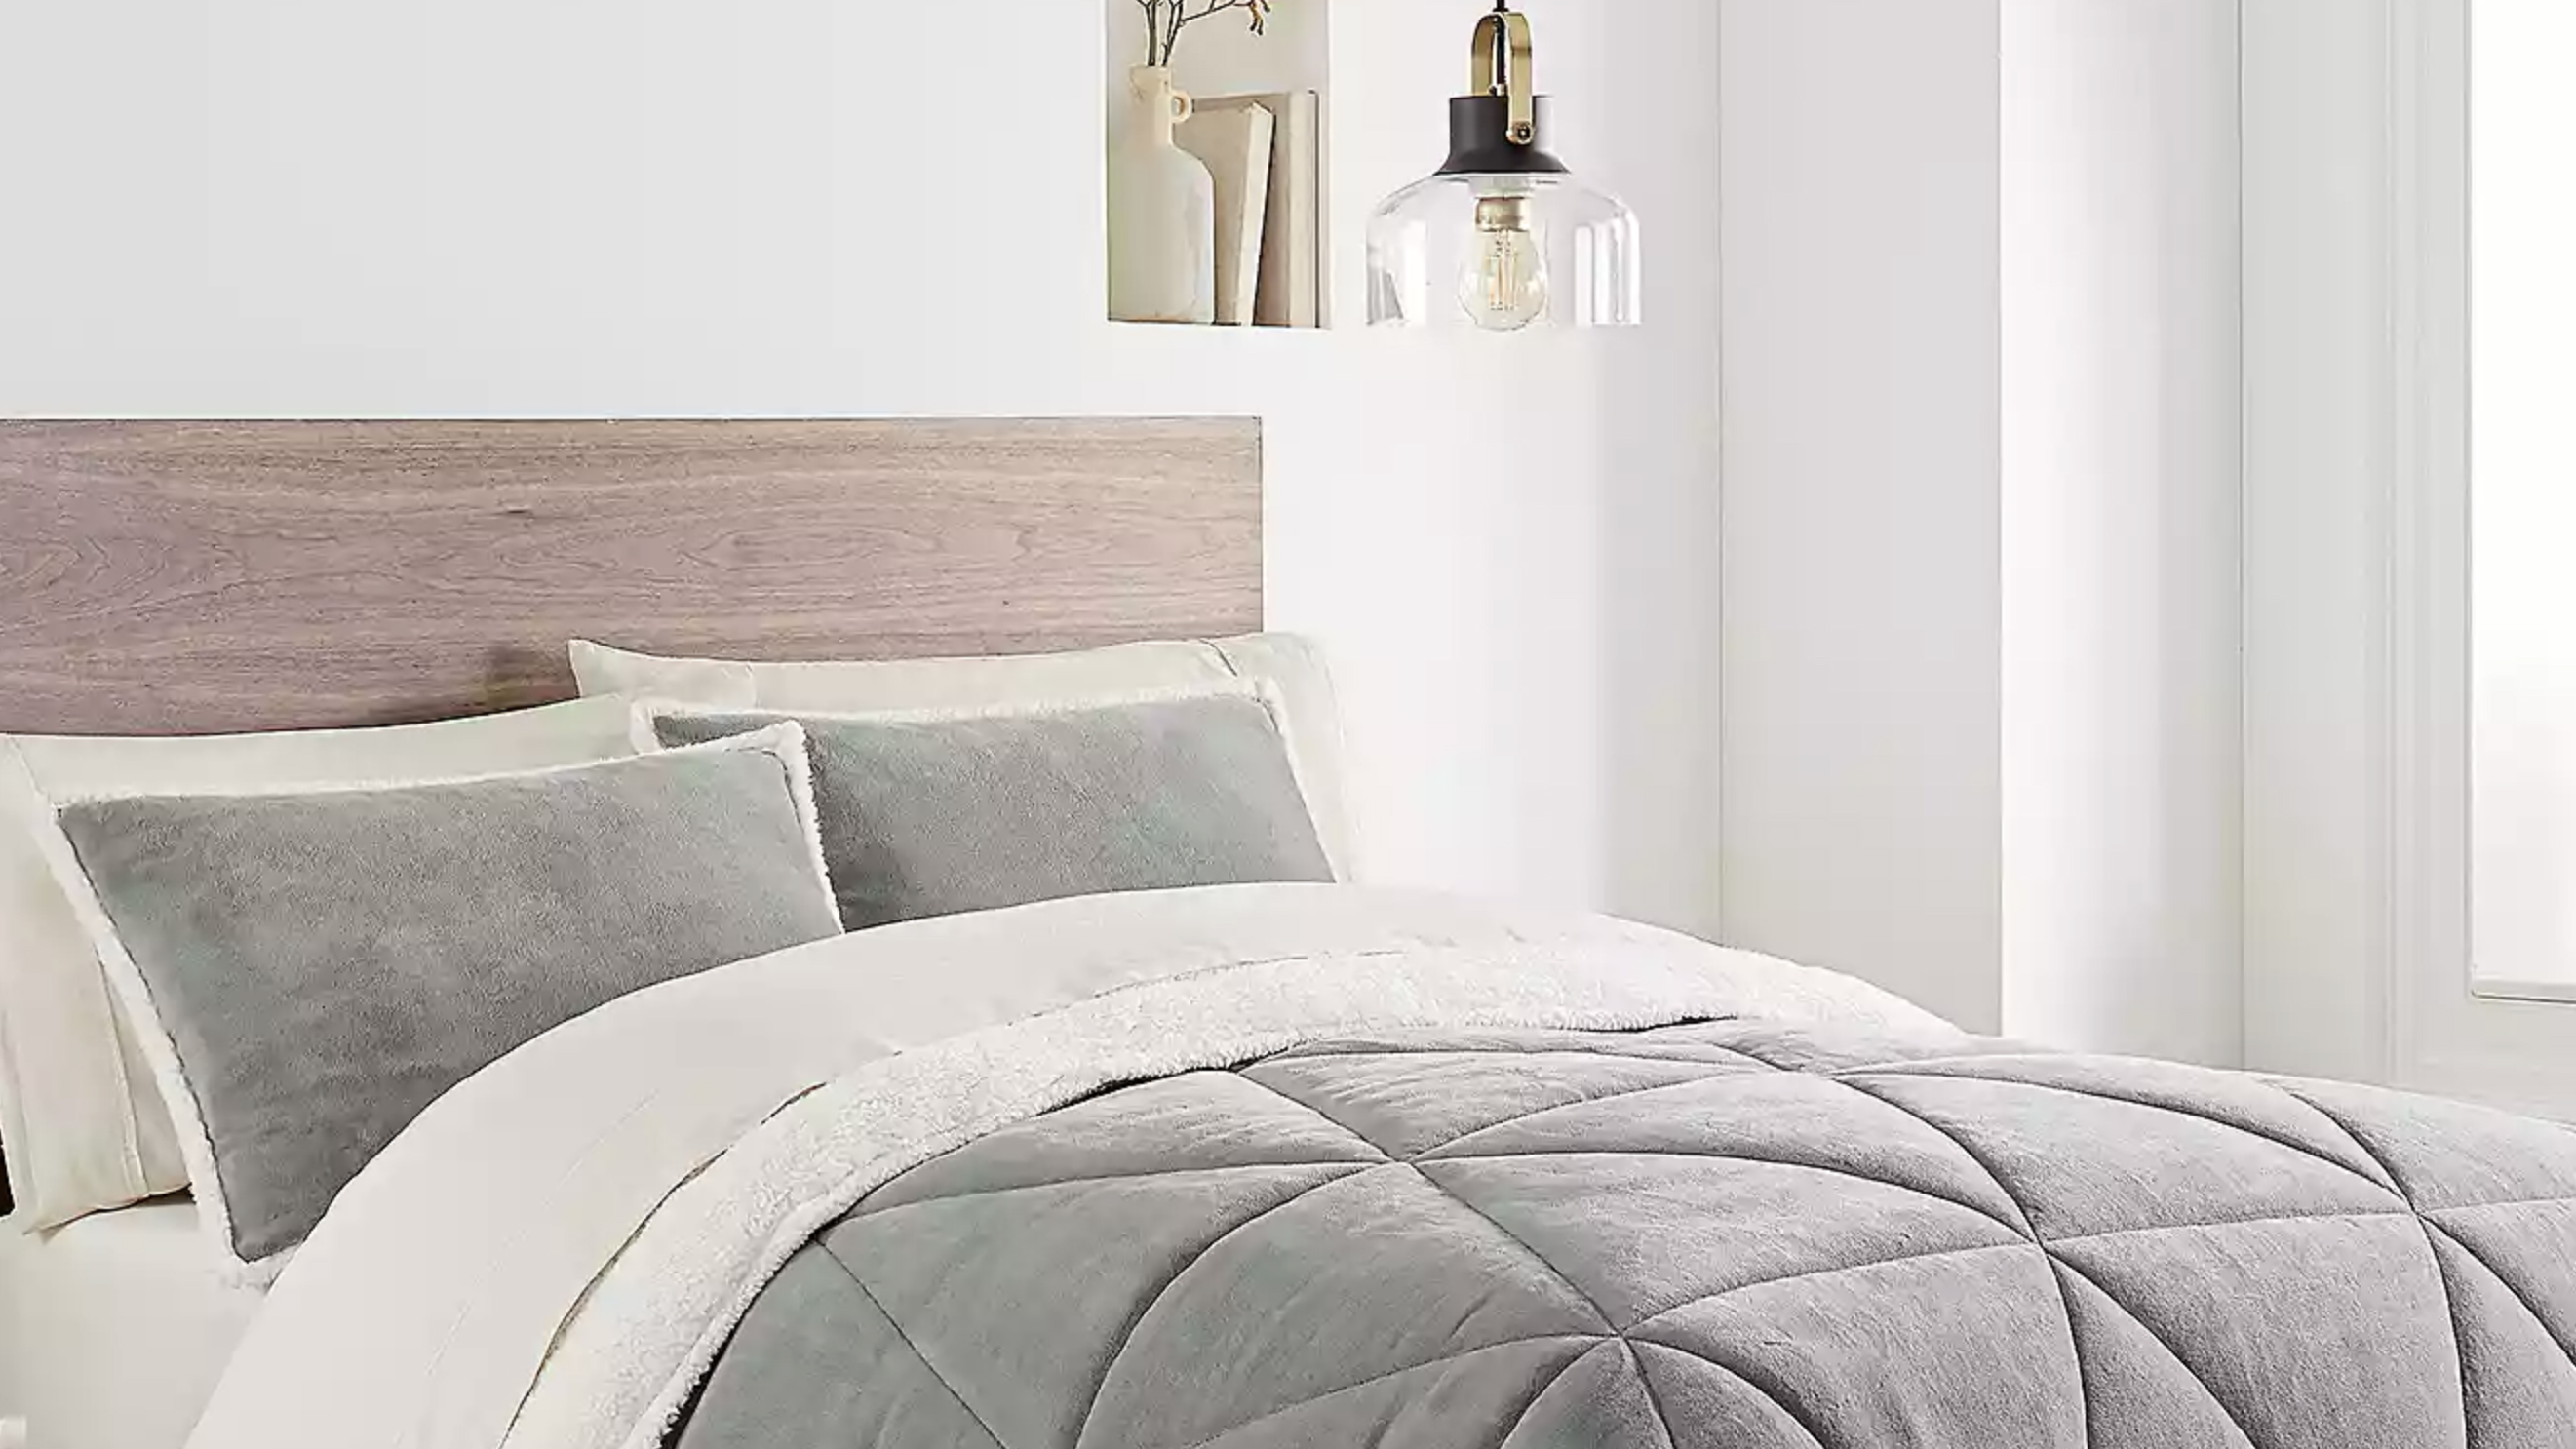 ugg avery bedding collection